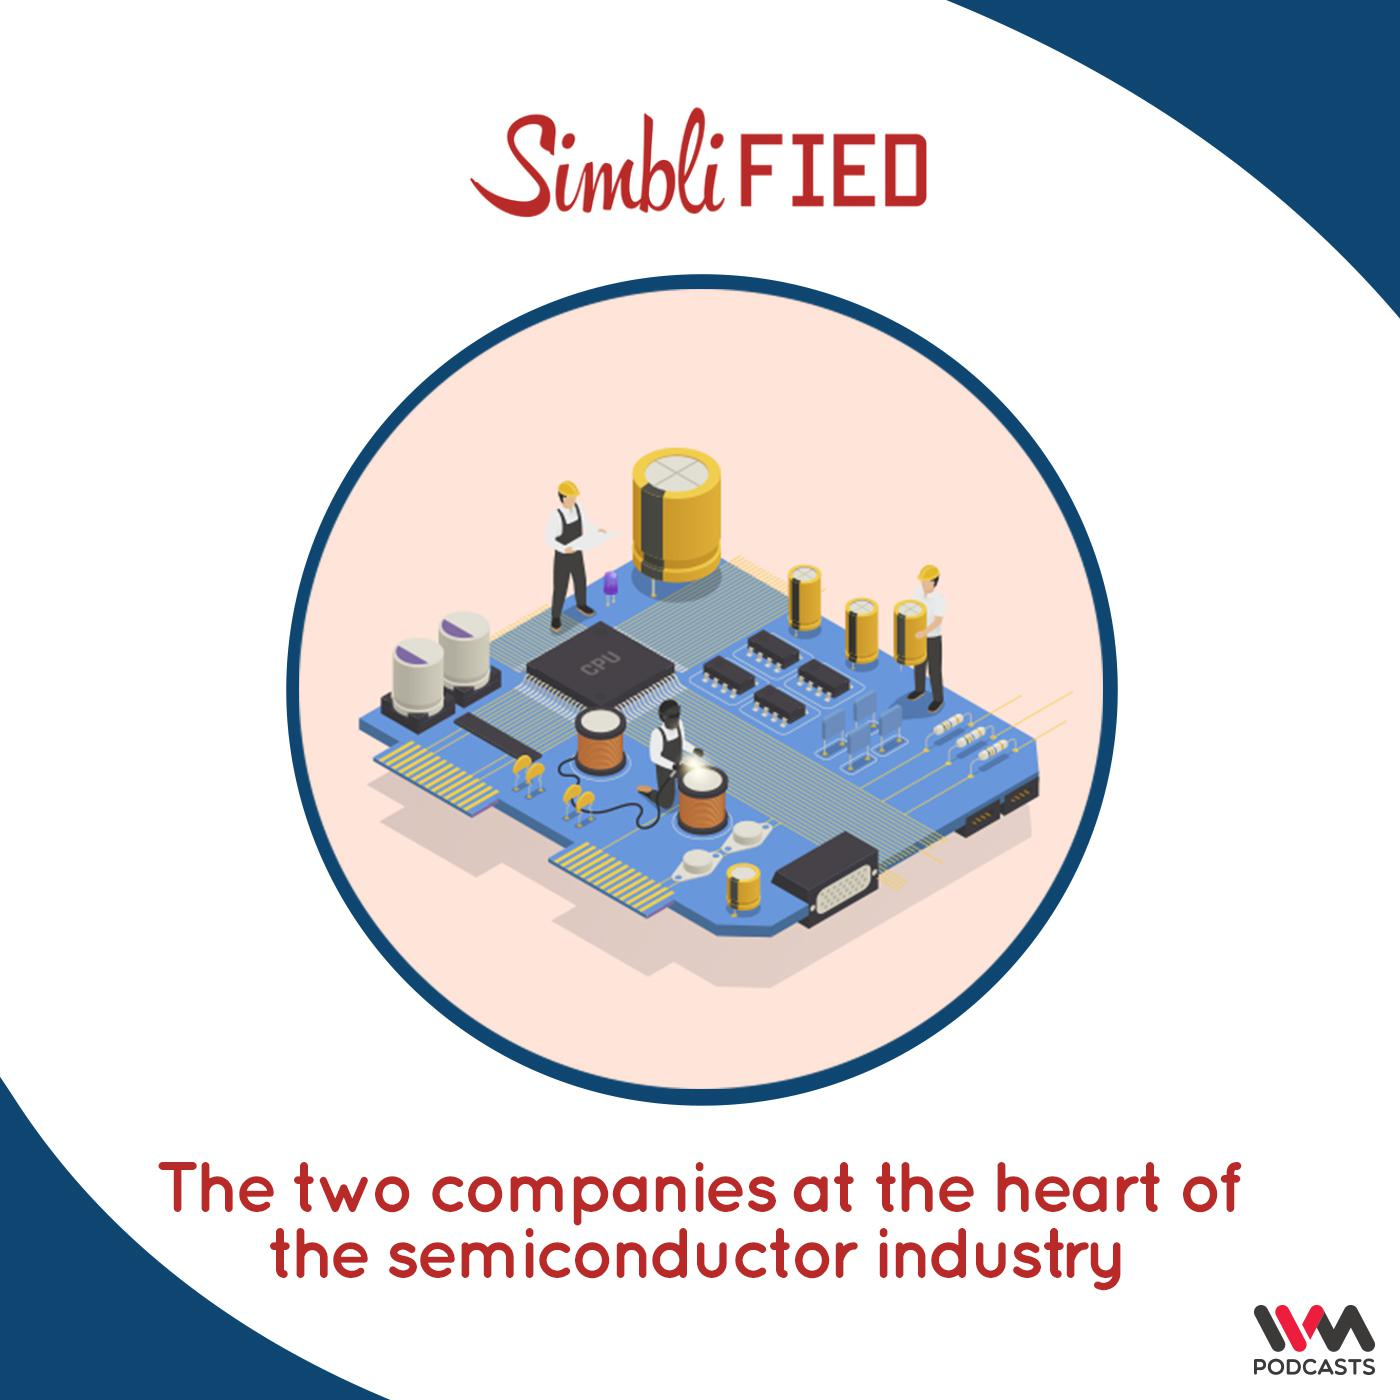 The two companies at the heart of the semiconductor industry